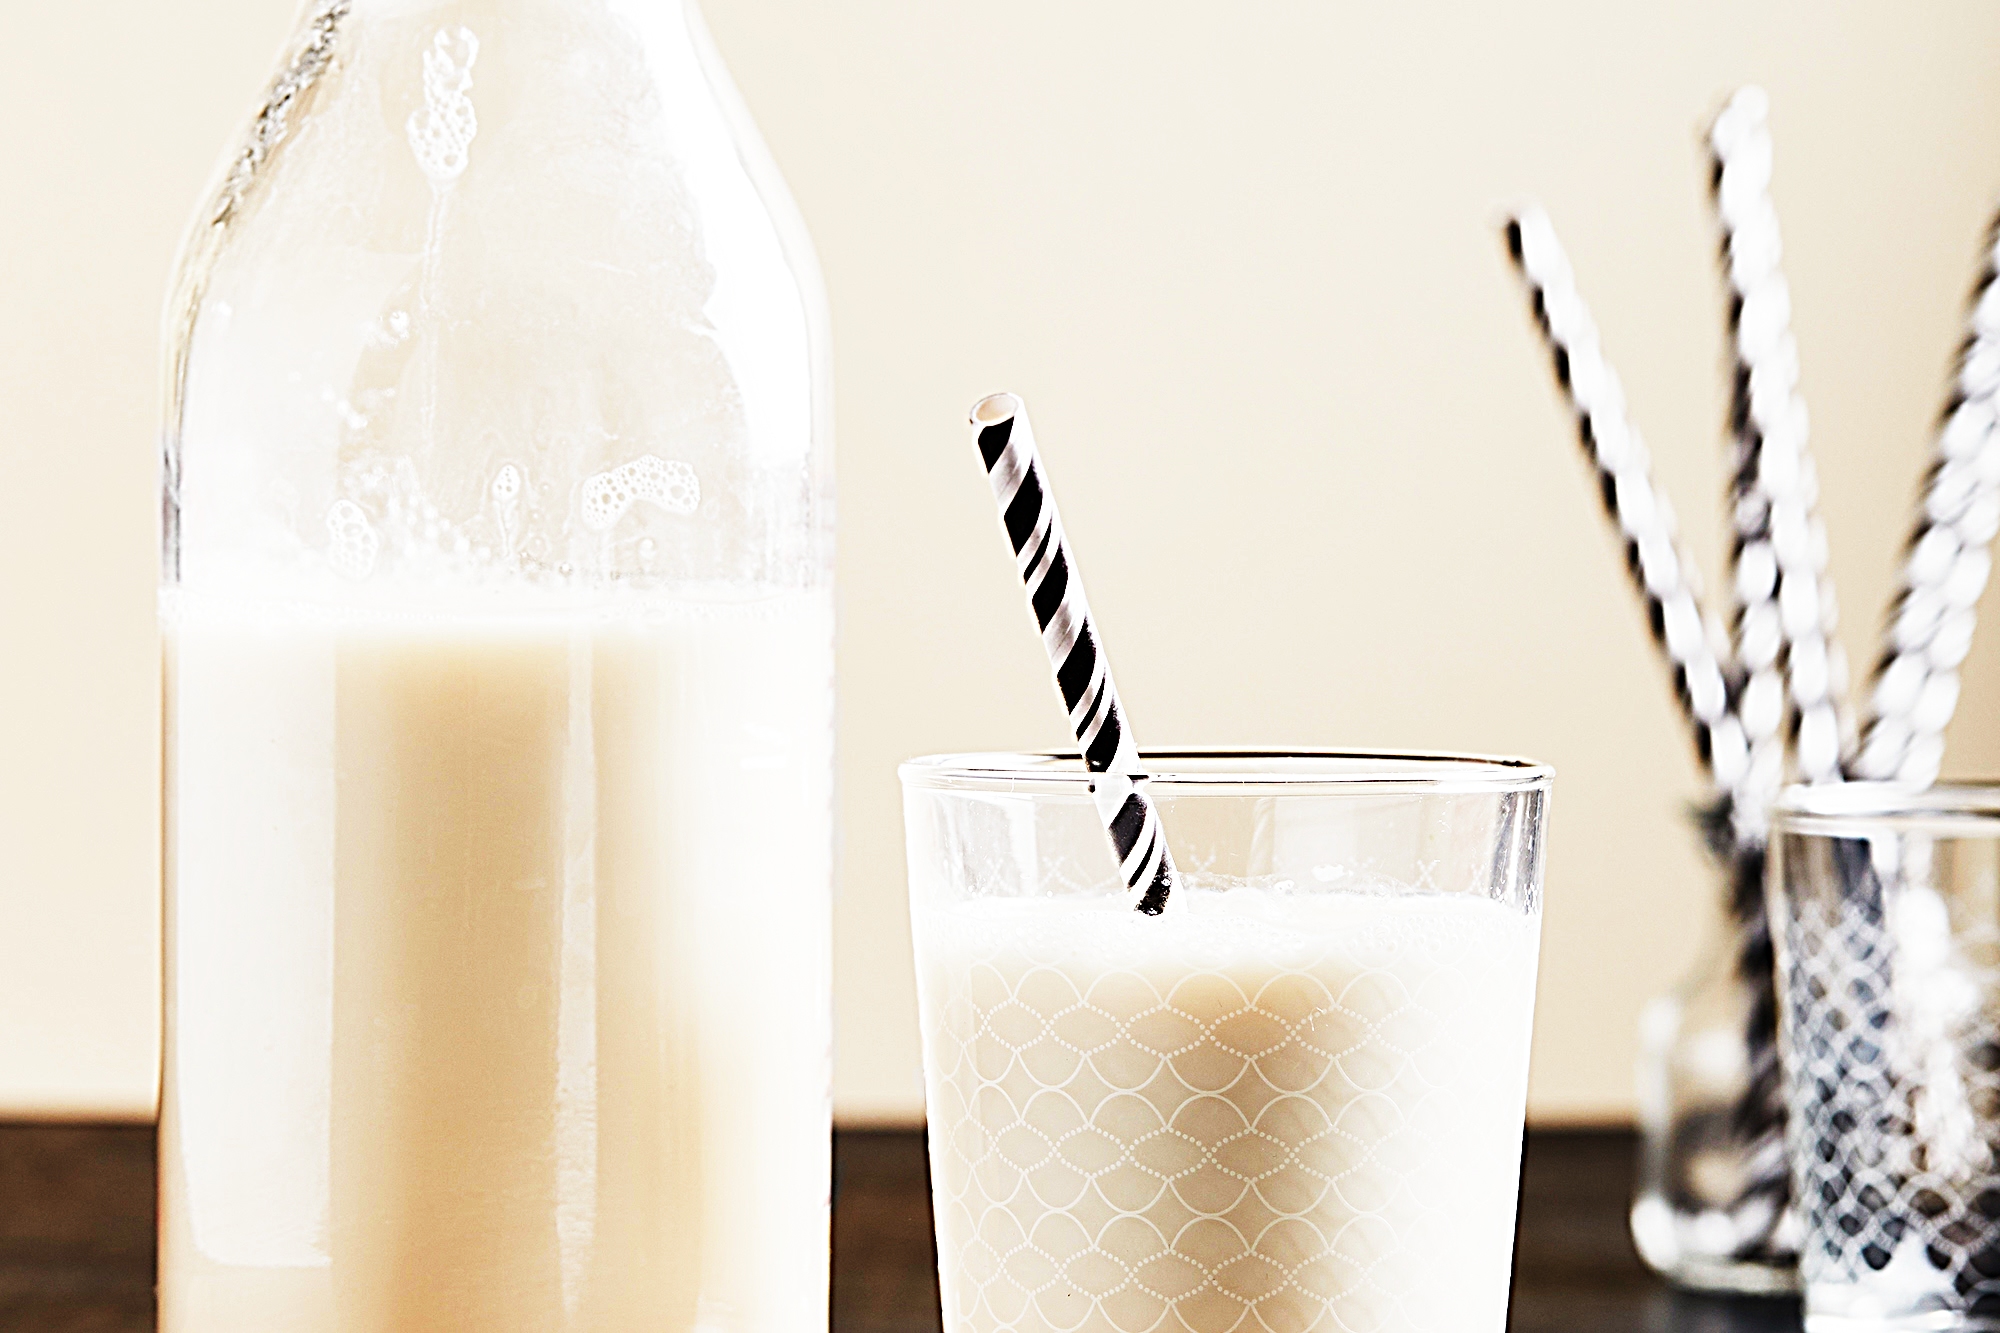 Stupid-Easy Recipe for Creamy Soy Almond Milk (#1 Top-Rated)